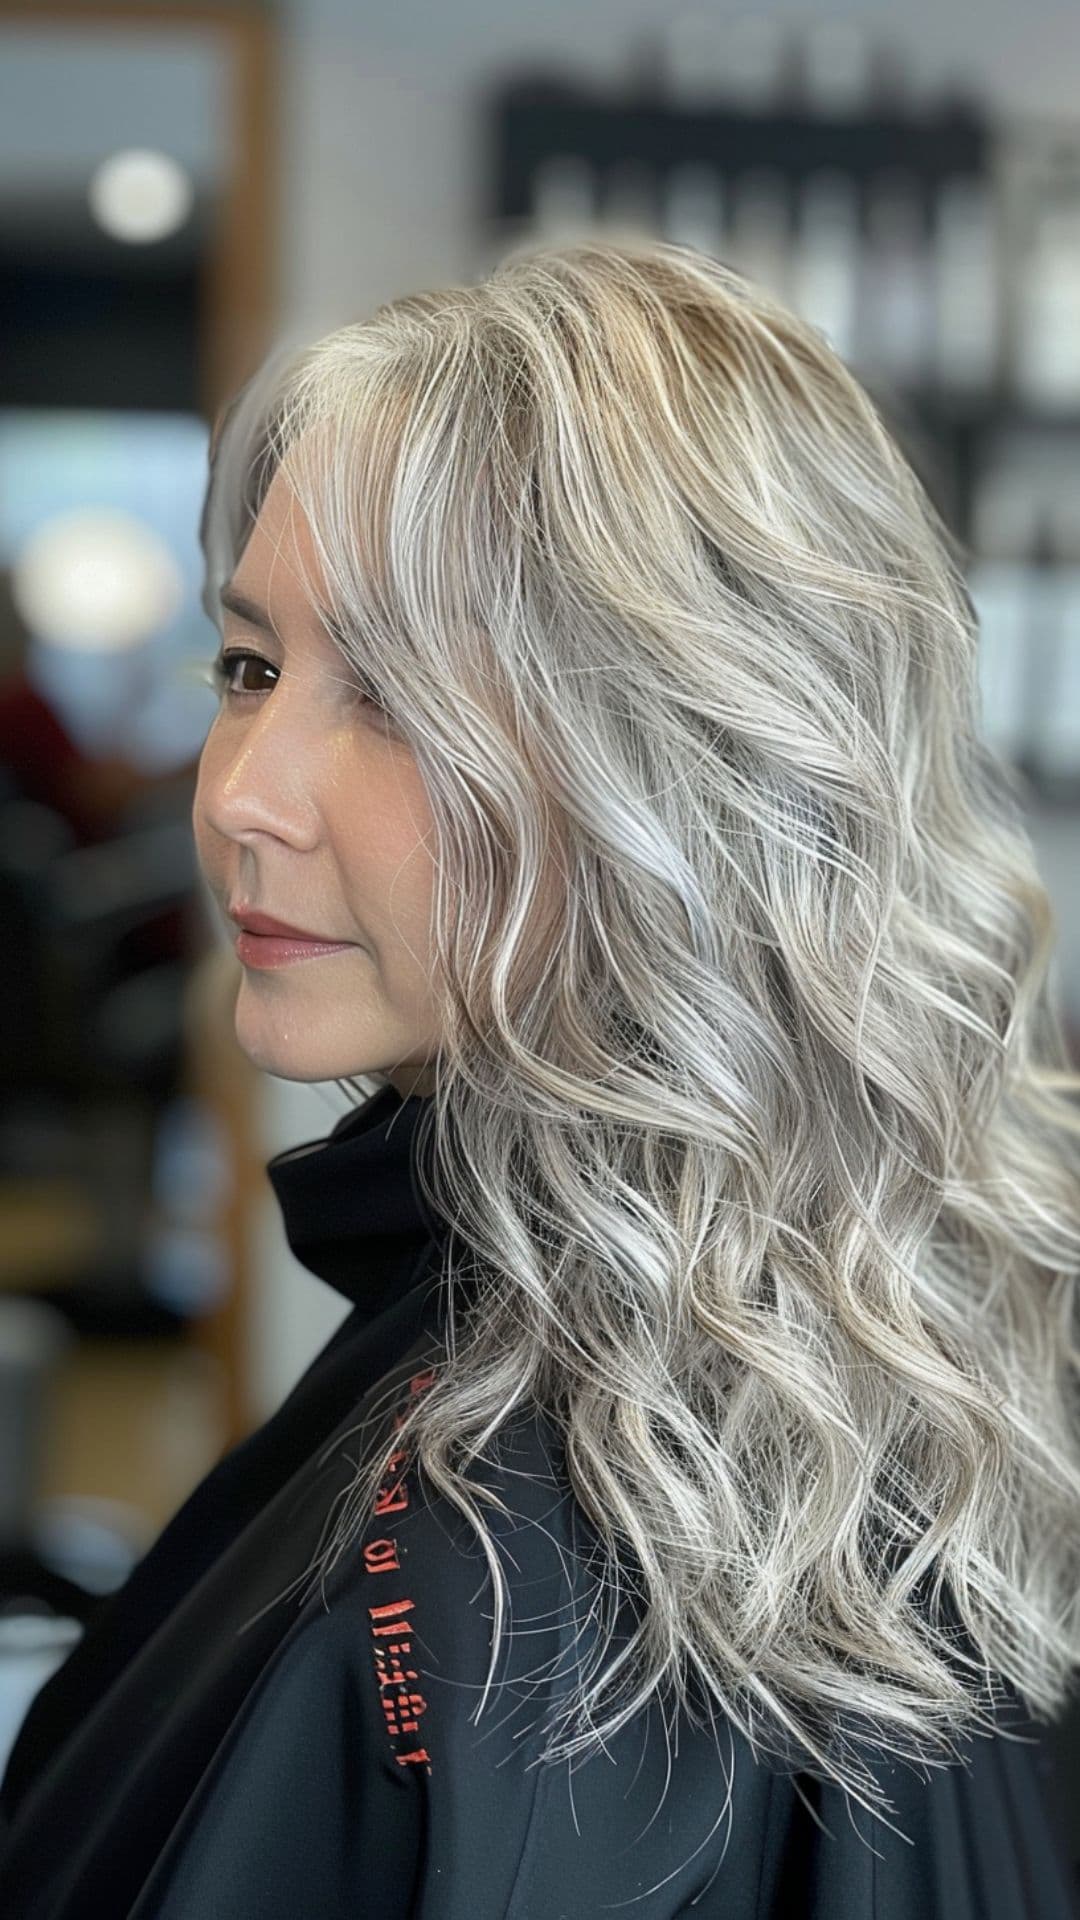 An older woman modelling a layered waves hairstyle.